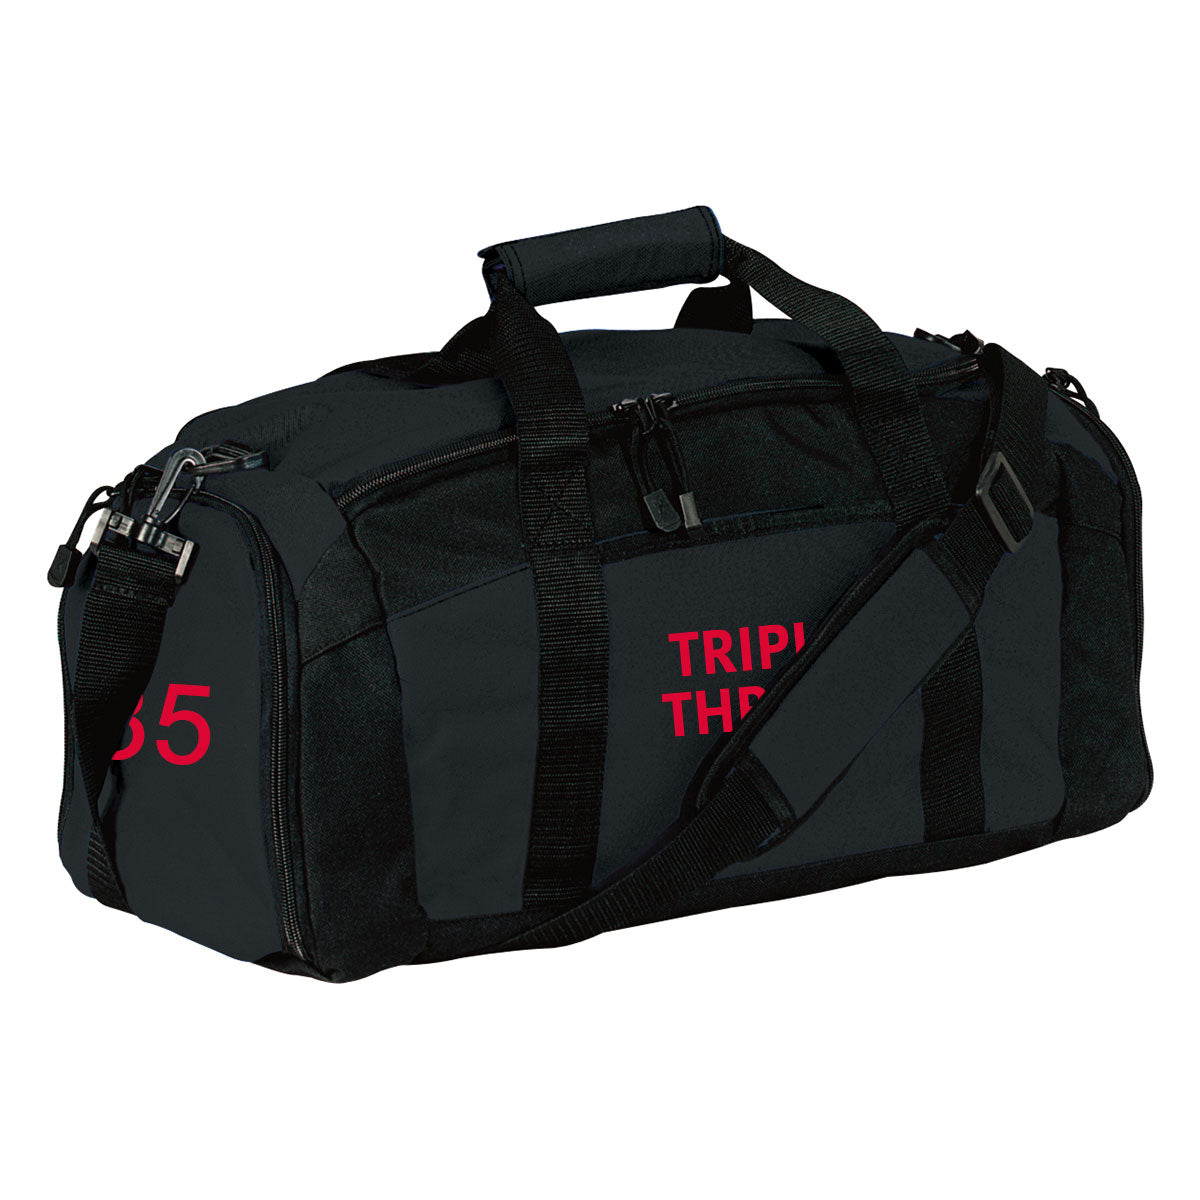 TRIPLE THREAT EMBROIDERED PLAYER DUFFLE BAG